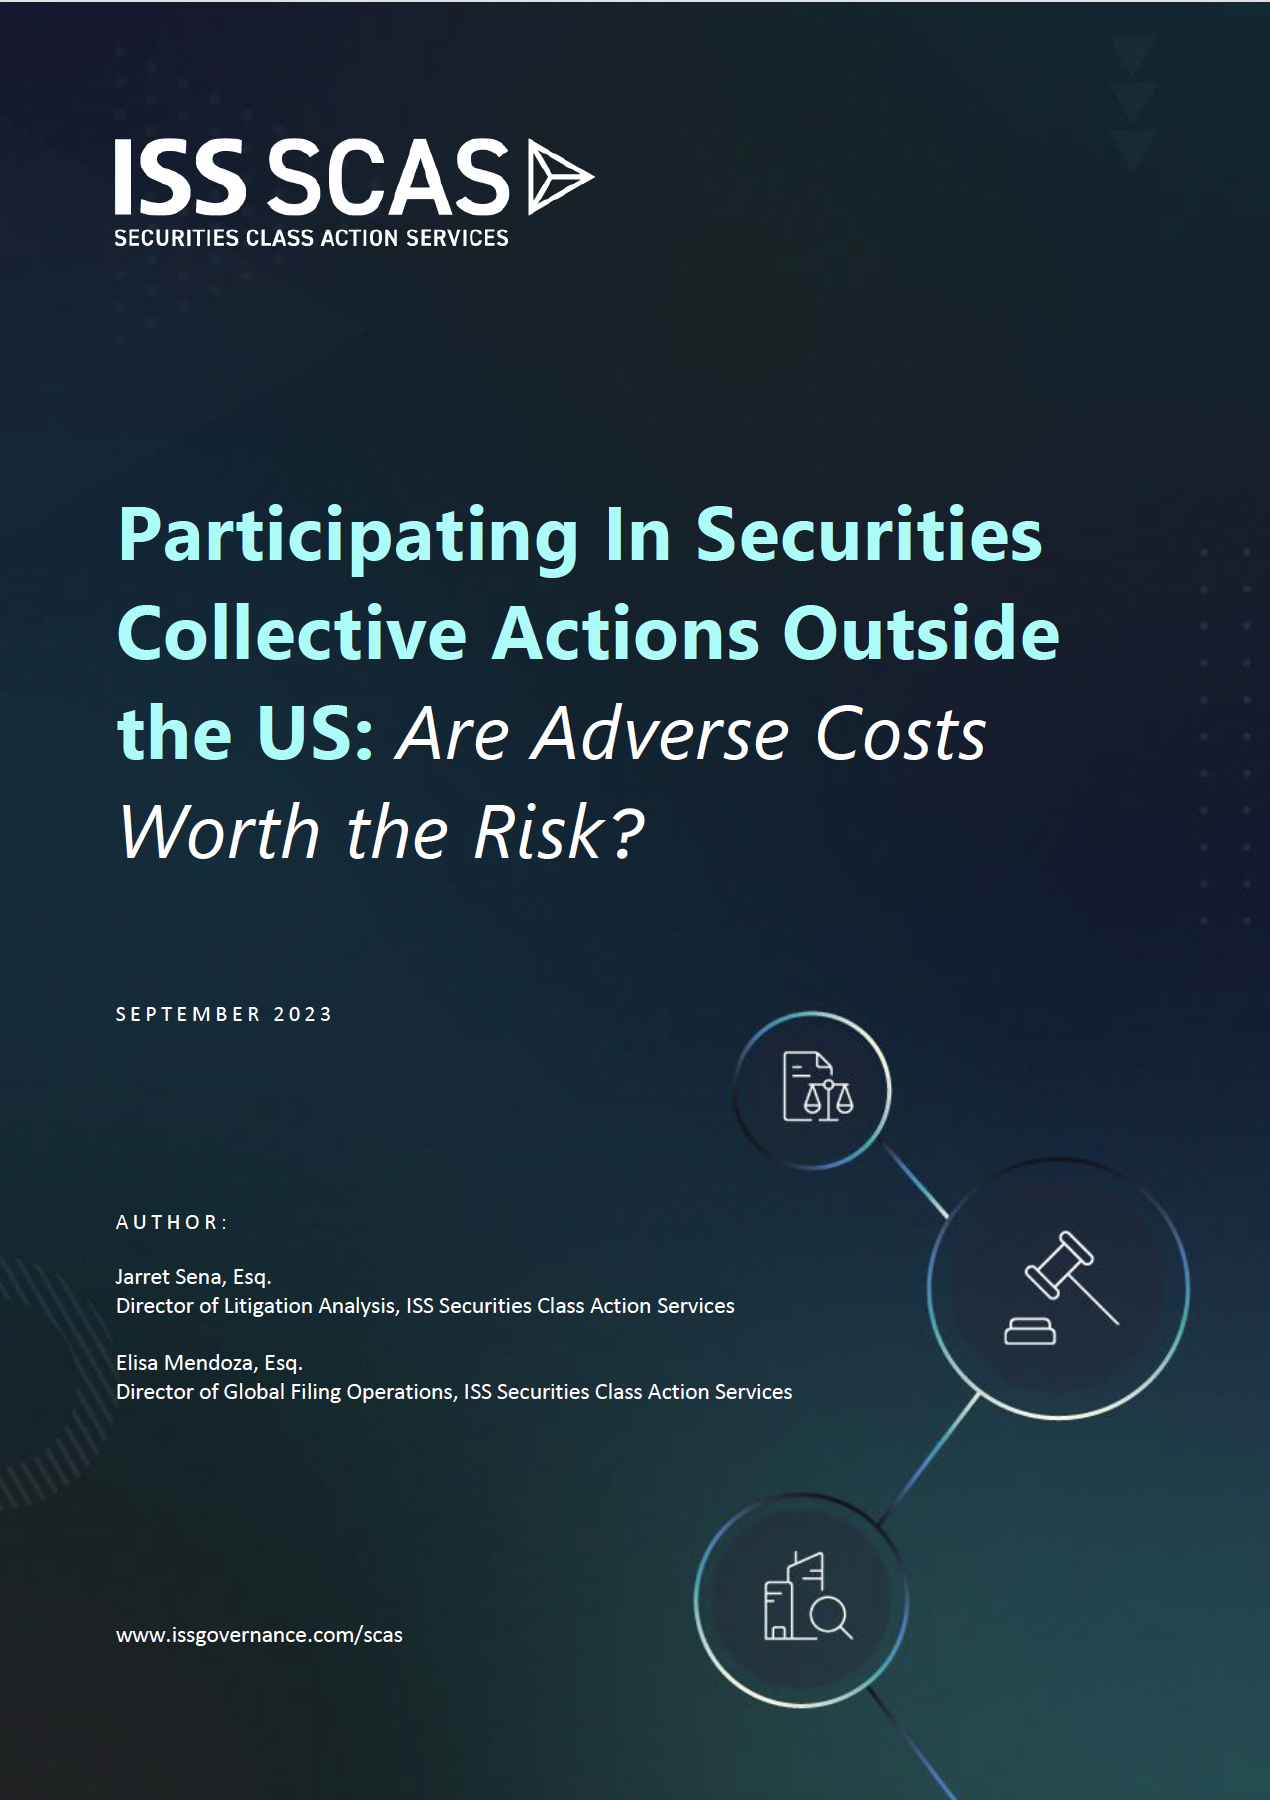 iss-scas-participating-in-securities-collective-actions-outside-the-us